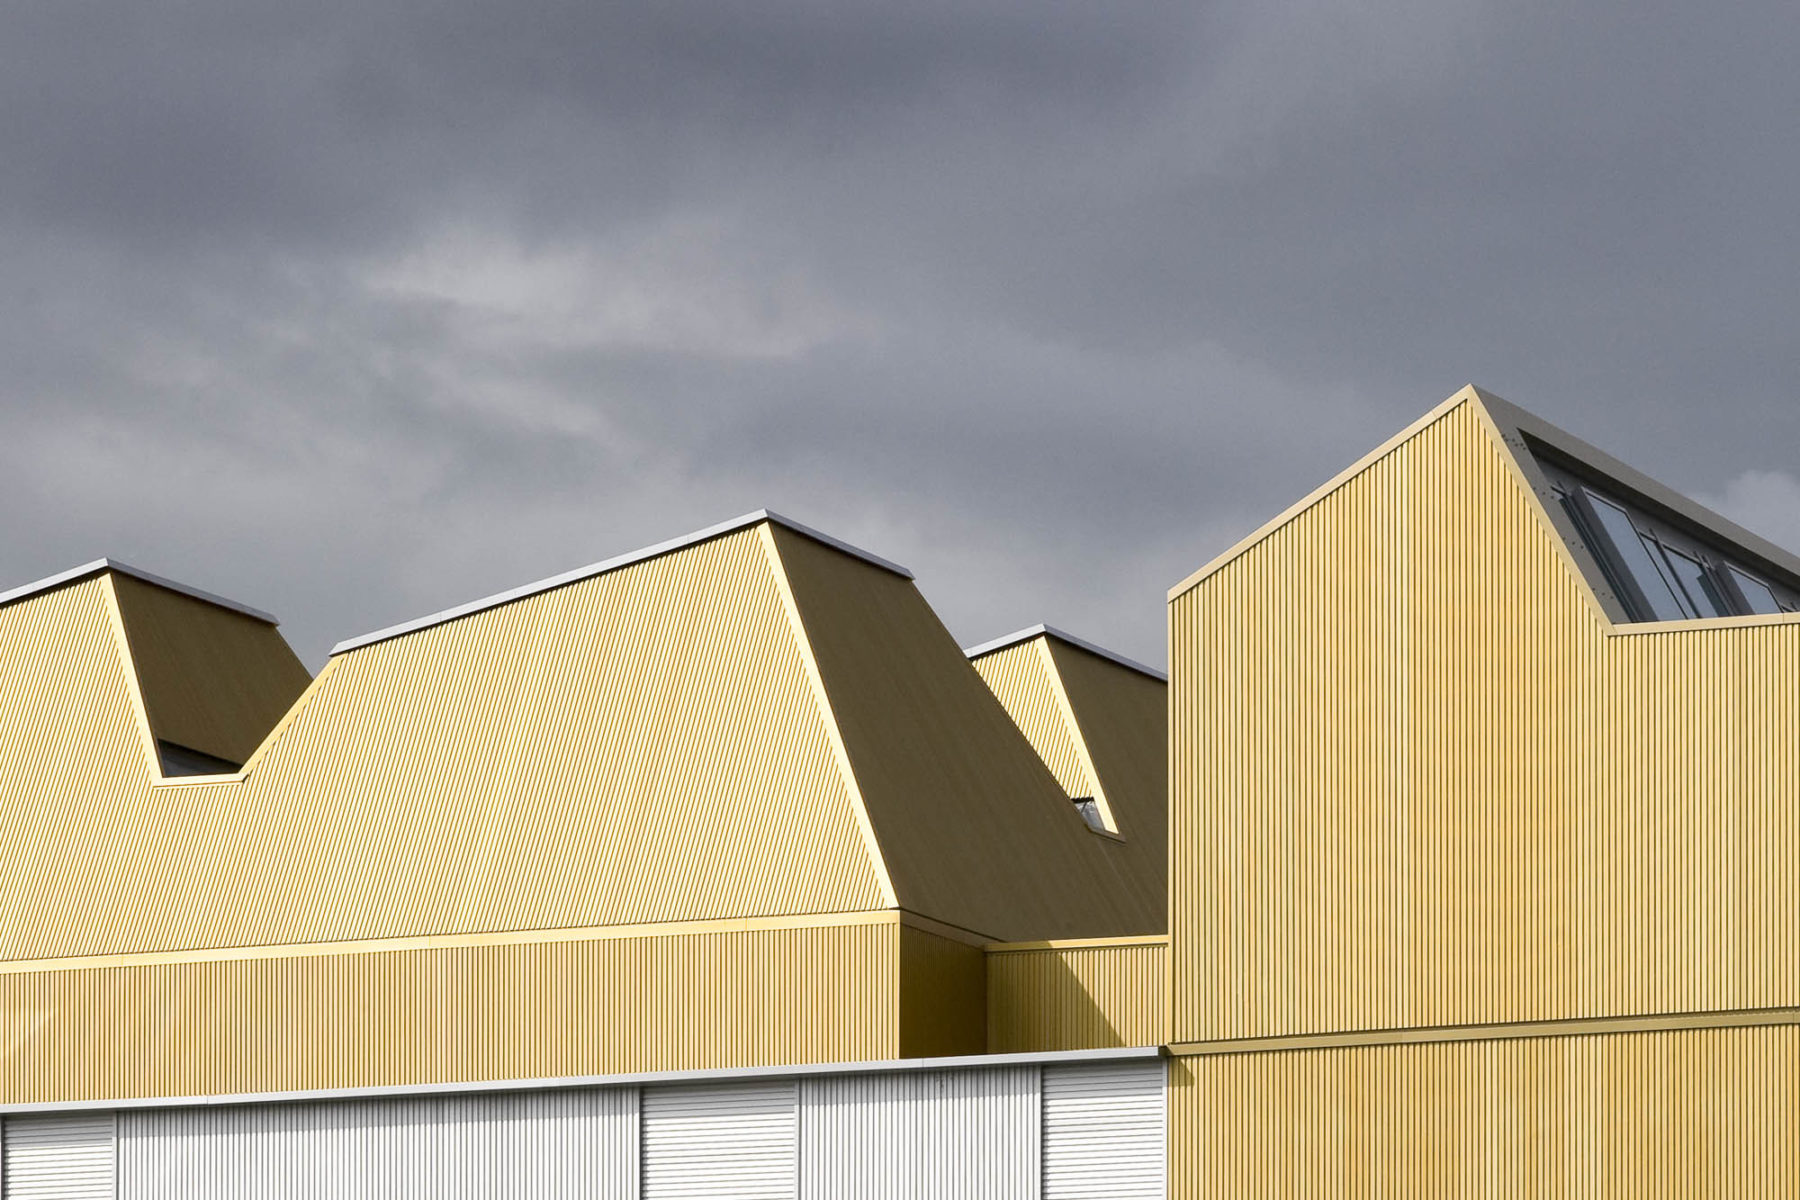 Scottish Ballet, Glasgow. Golden, trapezoid roof forms. Malcolm Fraser Architects